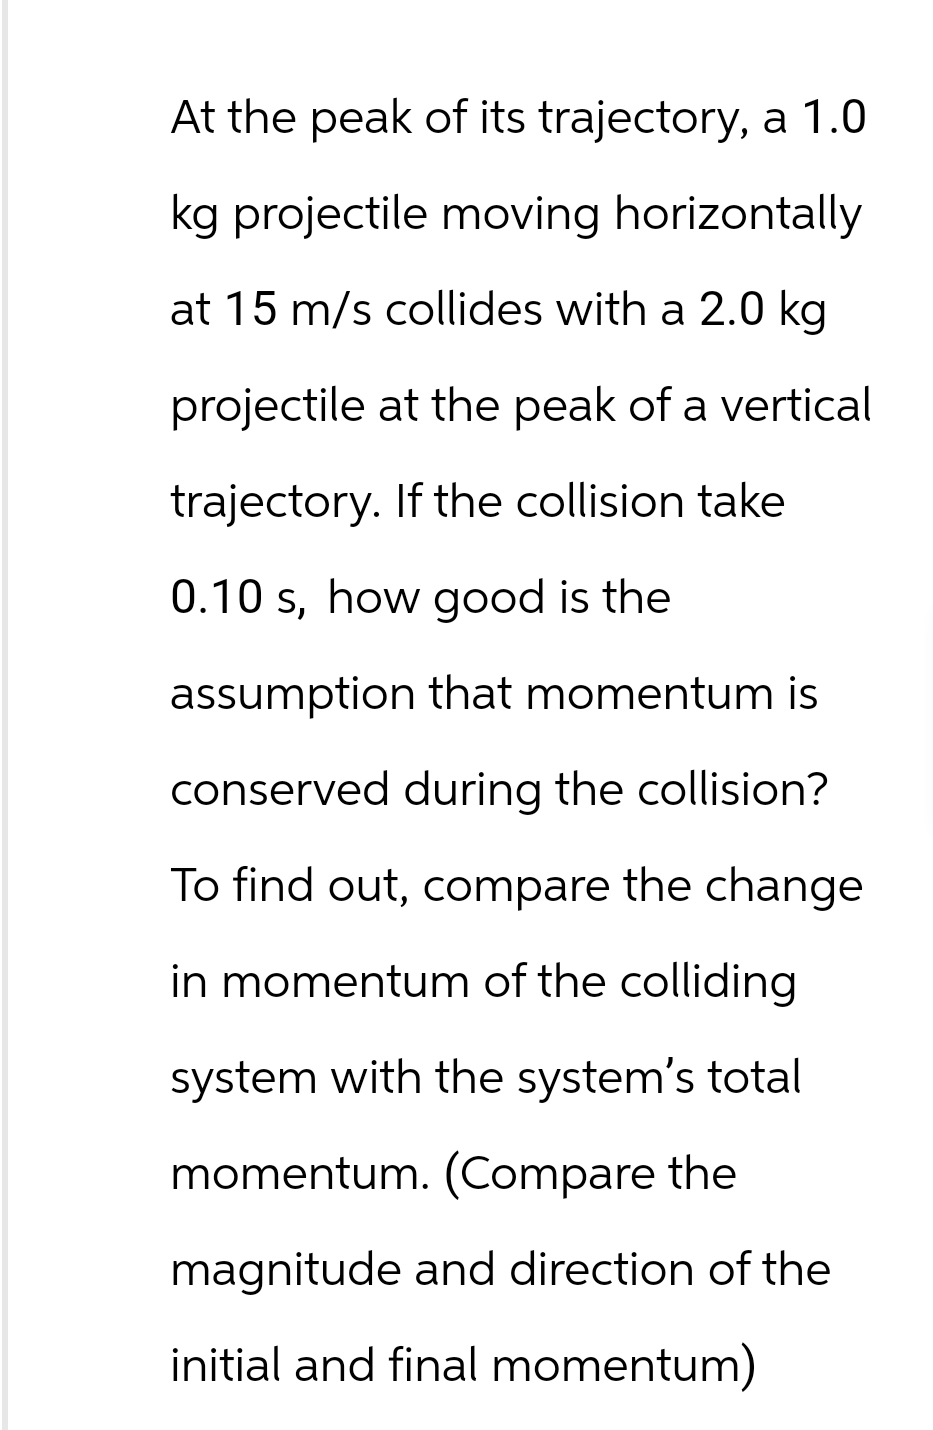 At the peak of its trajectory, a 1.0
kg projectile moving horizontally
at 15 m/s collides with a 2.0 kg
projectile at the peak of a vertical
trajectory. If the collision take
0.10 s, how good is the
assumption that momentum is
conserved during the collision?
To find out, compare the change
in momentum of the colliding.
system with the system's total
momentum. (Compare the
magnitude and direction of the
initial and final momentum)